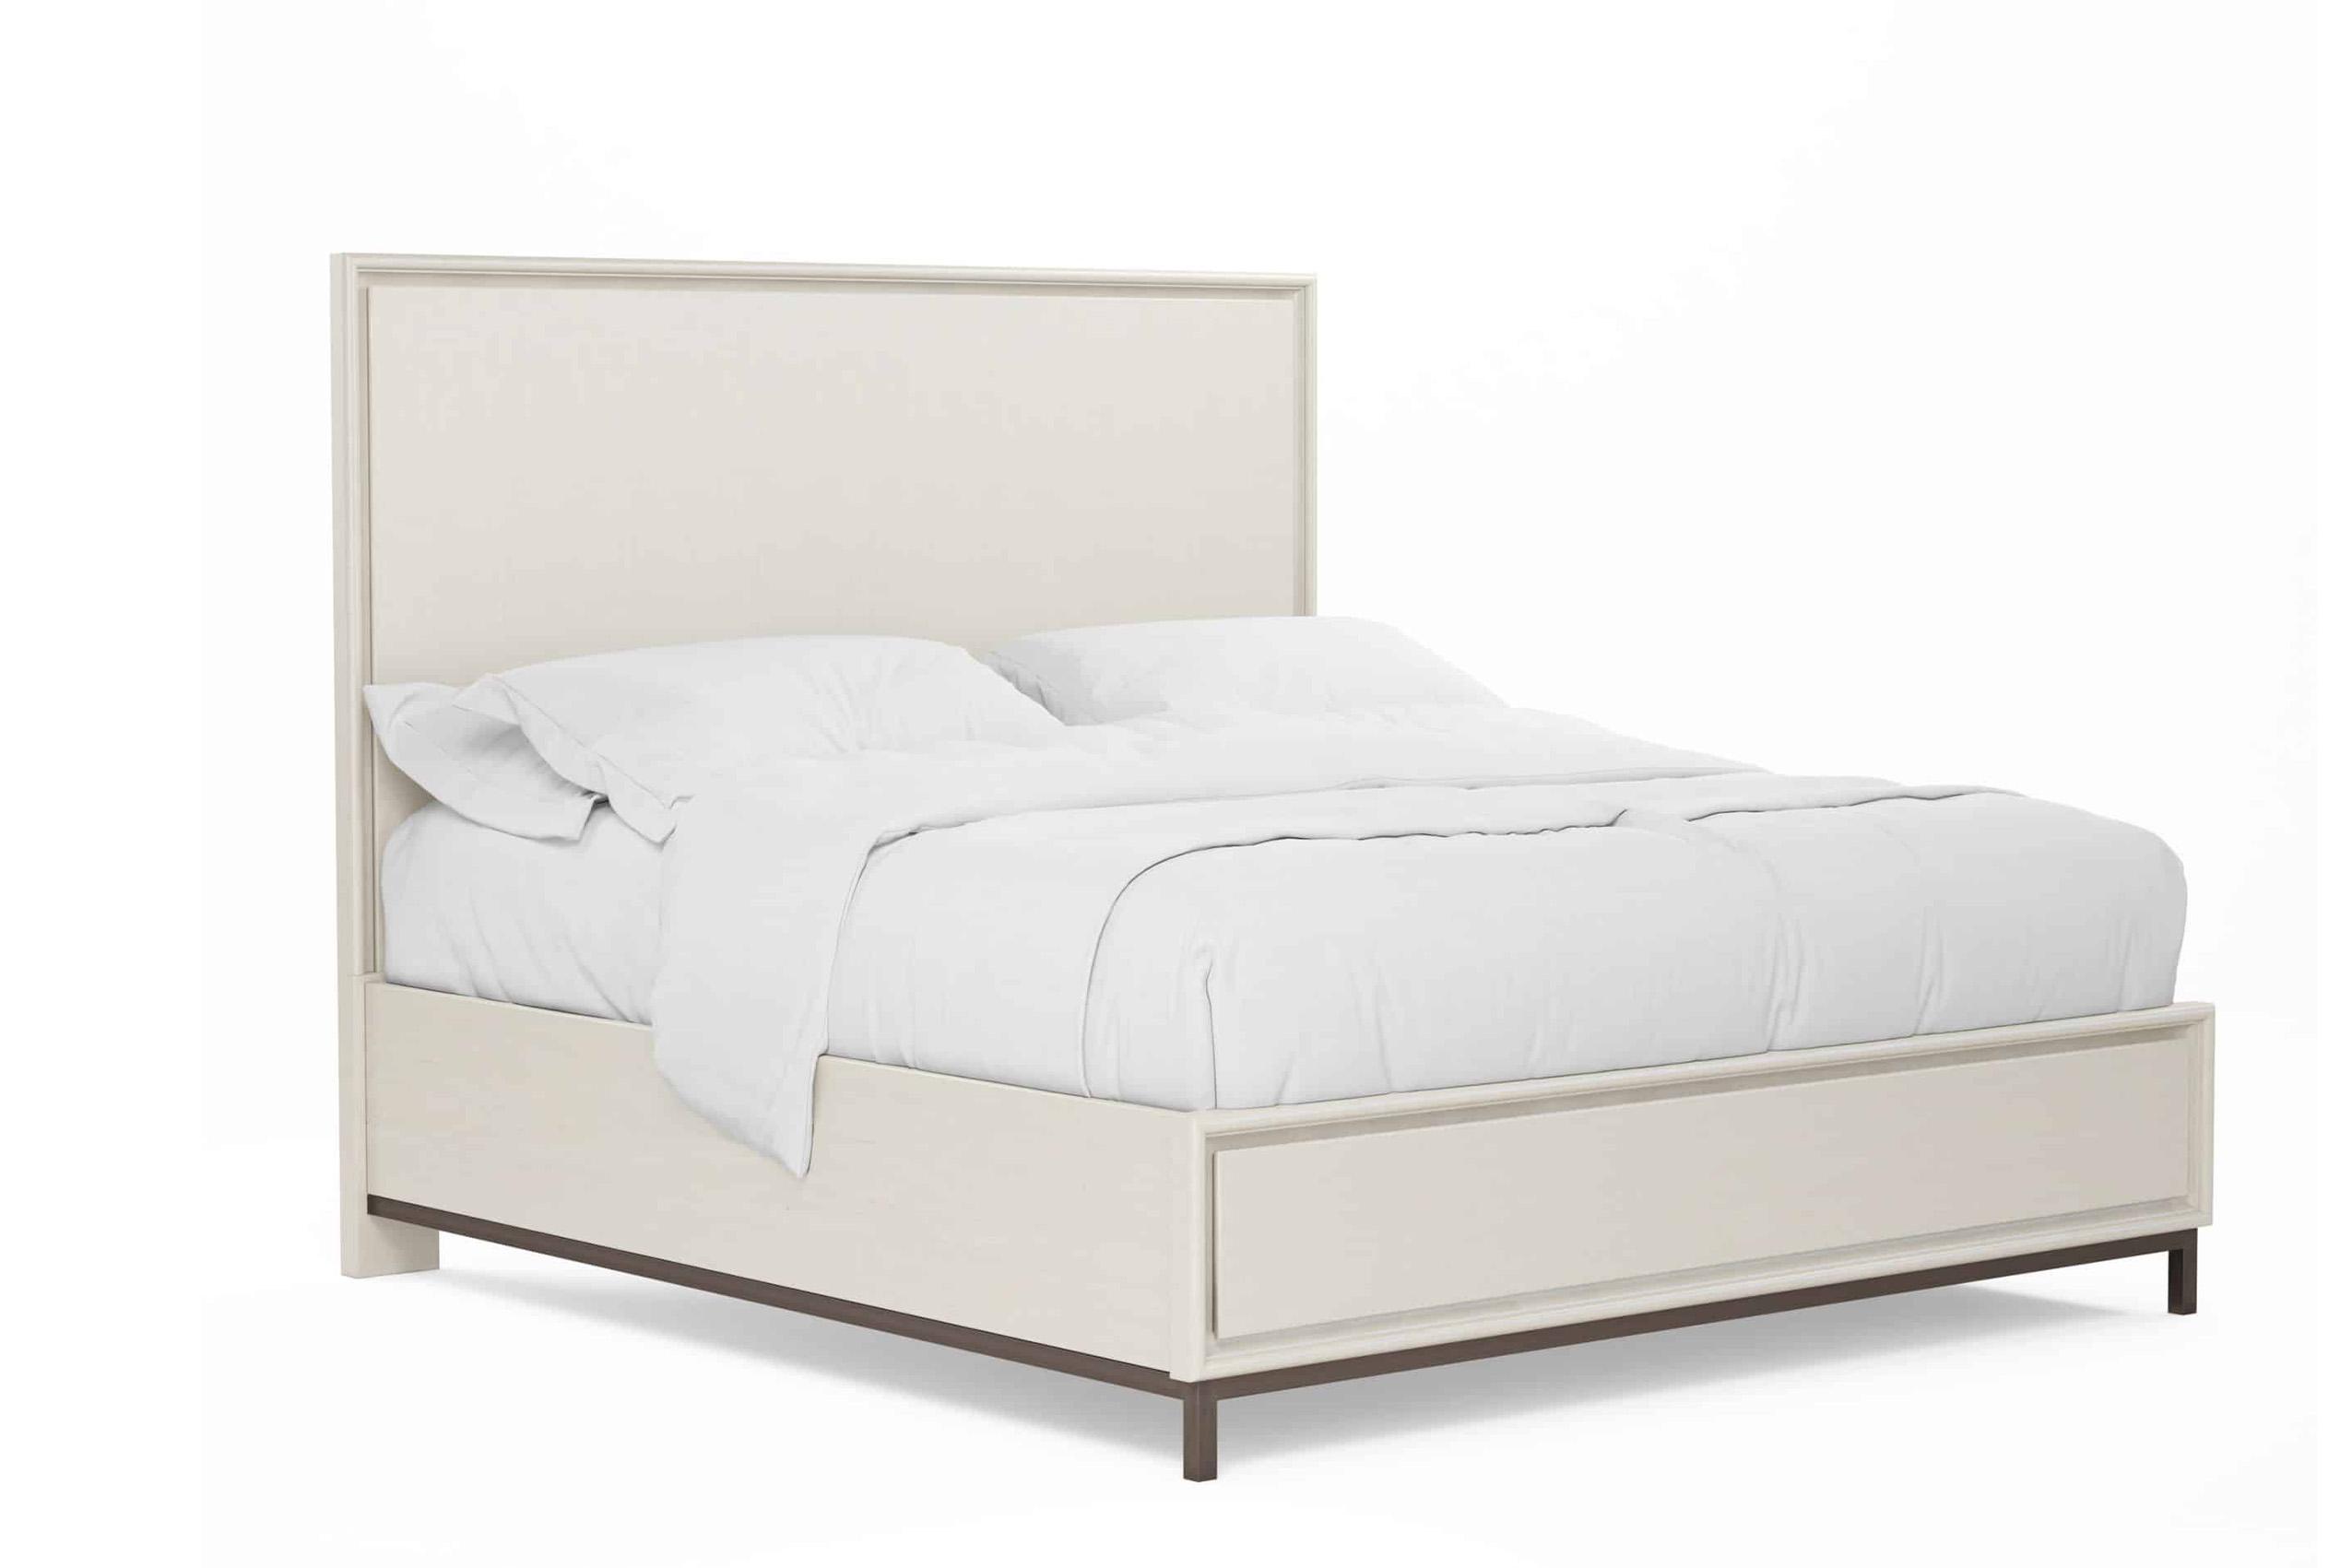 a.r.t. furniture 289137-1040 Panel Bed